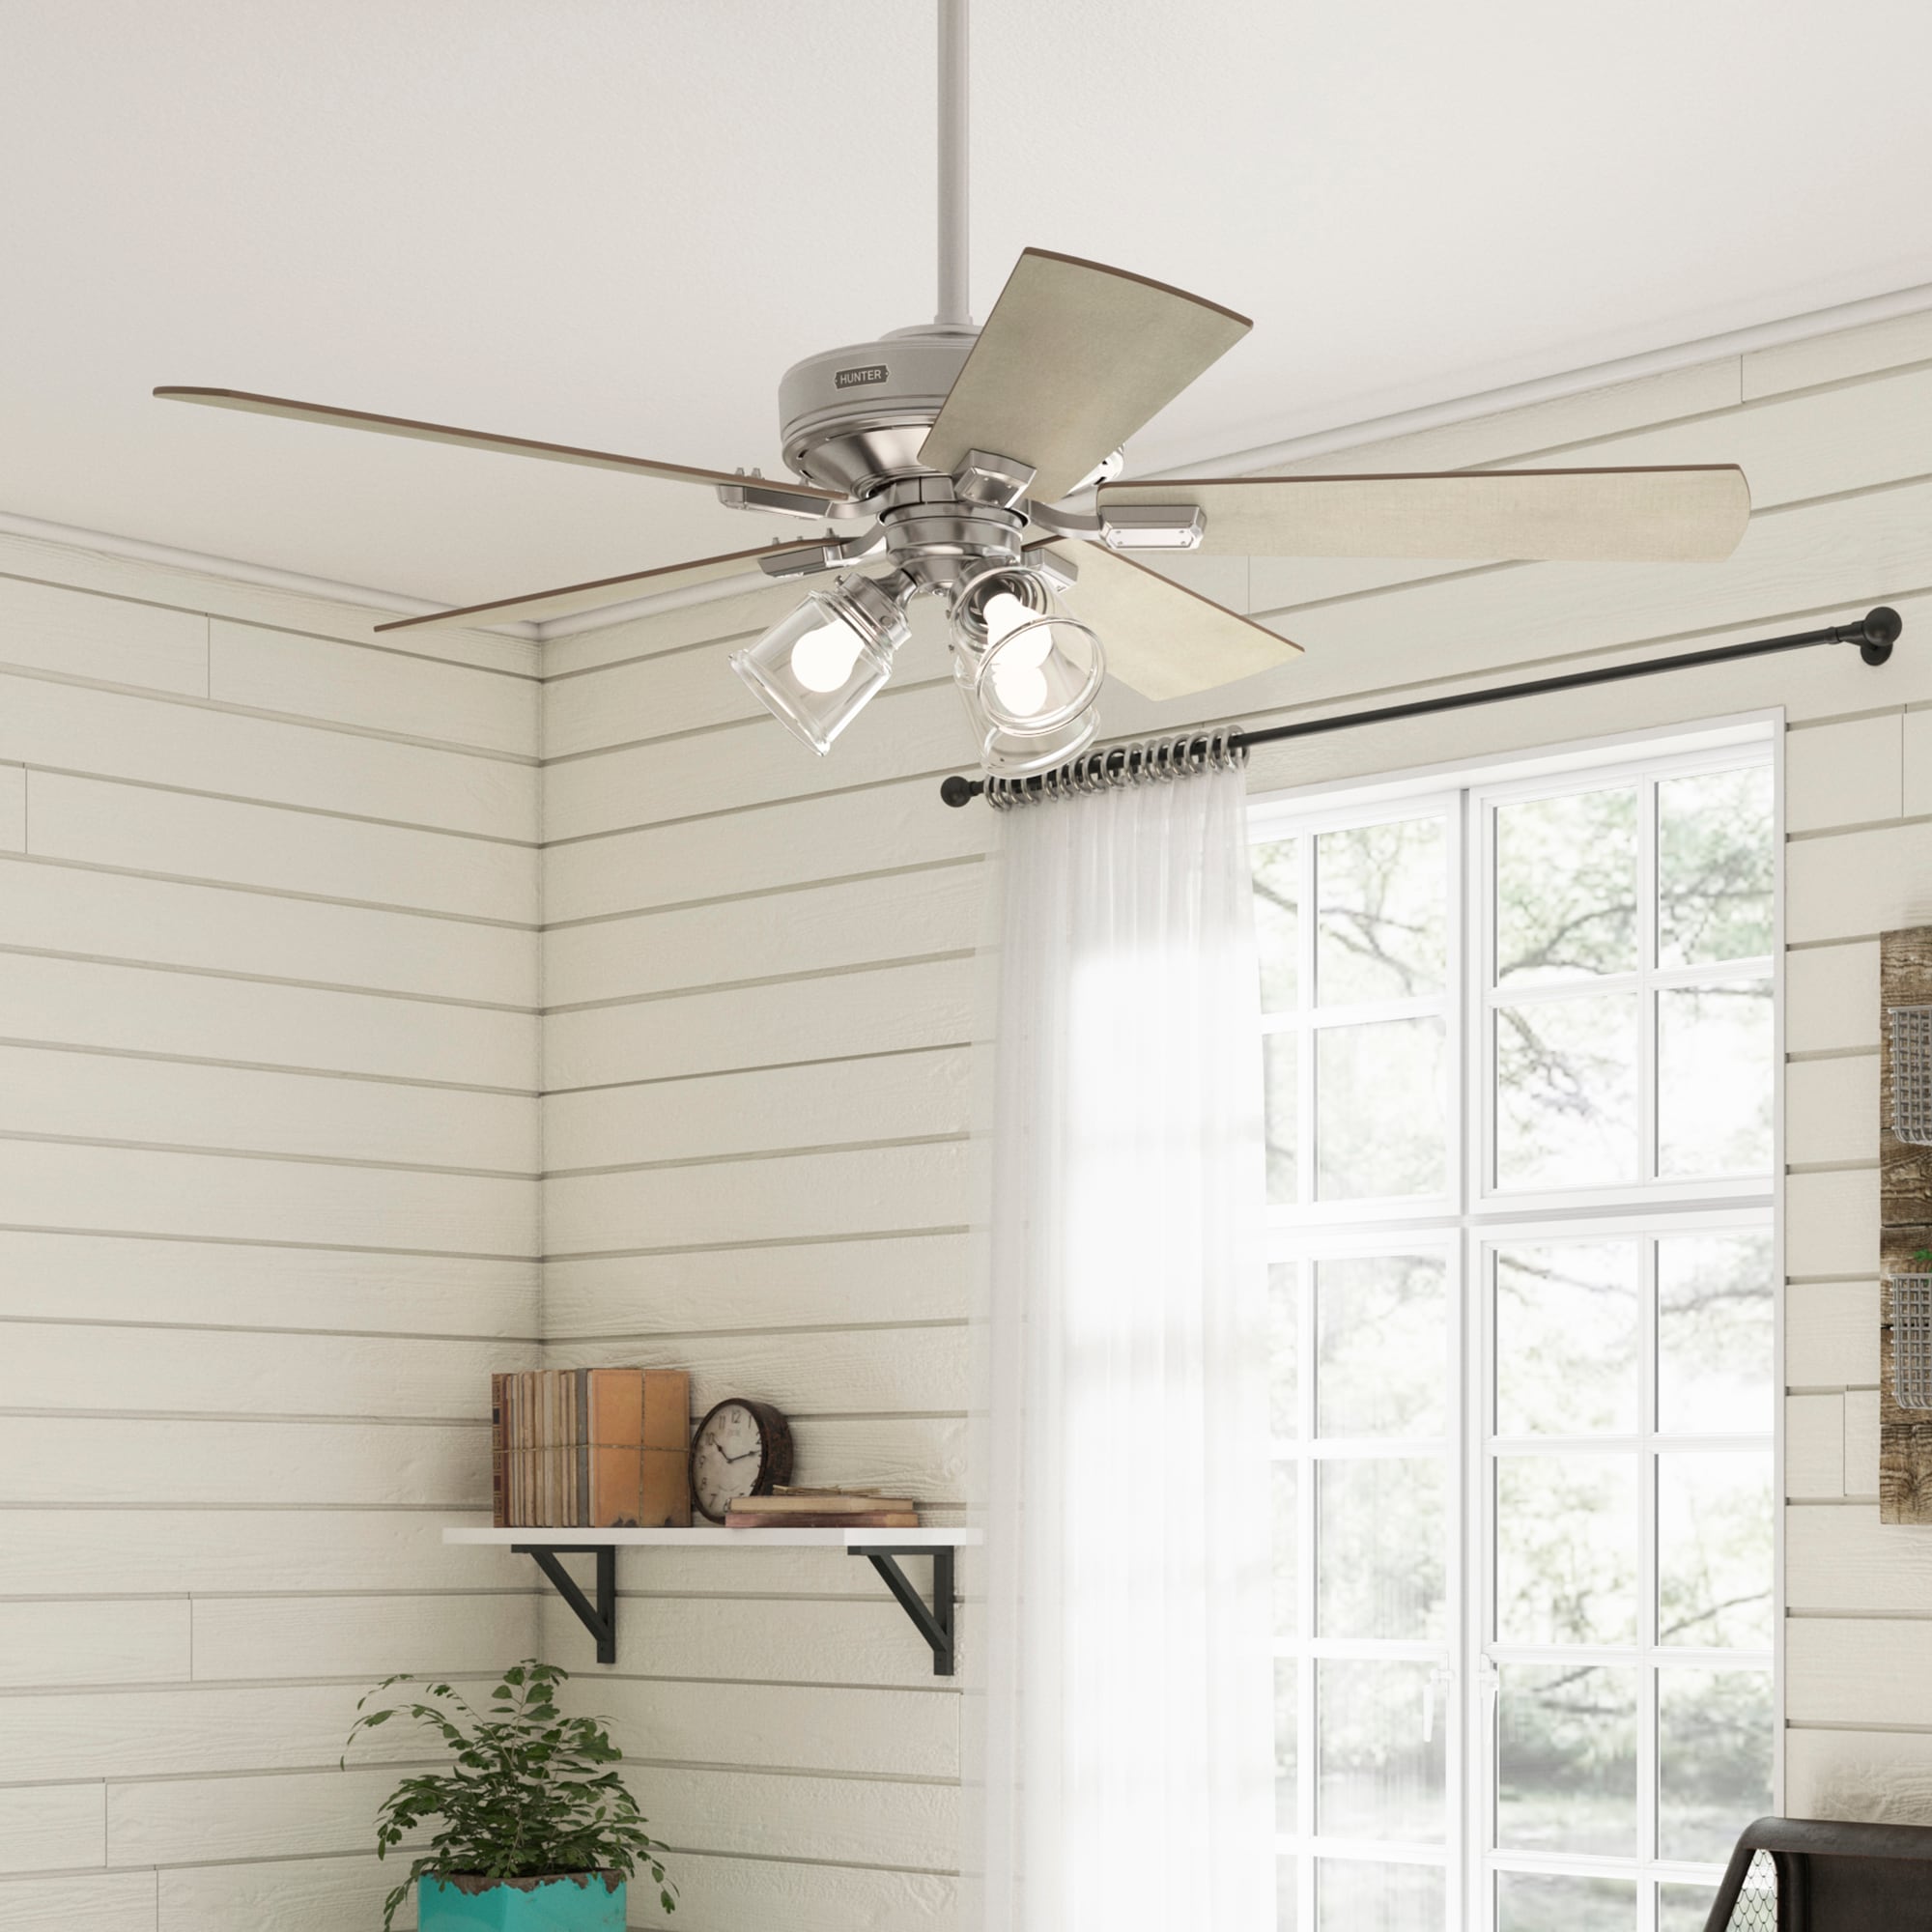 Hunter Crestfield 52 In Brushed Nickel Indoor Ceiling Fan With Light And Remote 5 Blade The Fans Department At Lowes Com